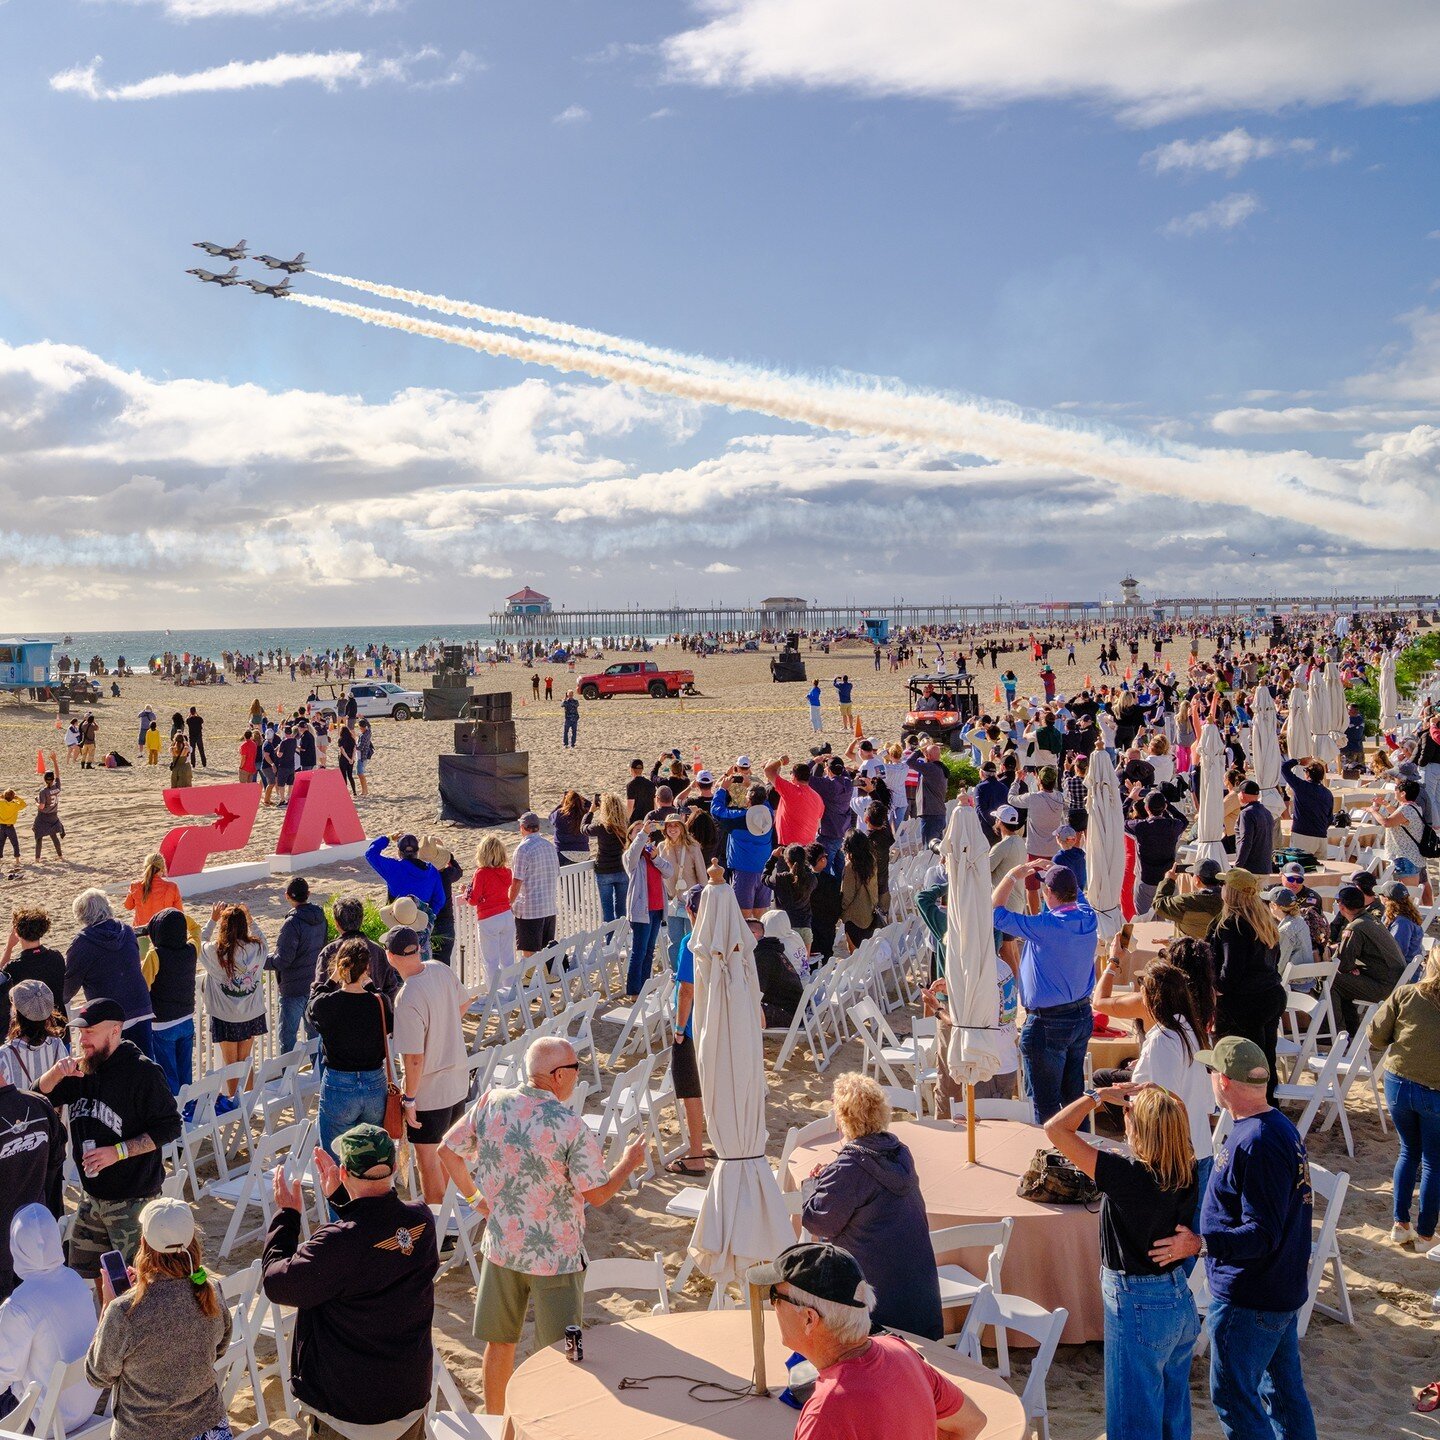 Pacific Airshow Huntington Beach offers SEVEN unique ticket types from only $30 (+ booking fee)! 🎟️ Let us give you the lowdown to help you to choose the best way to sit back and enjoy the show! ☀️✈️

All tickets include access to food vendors, beac